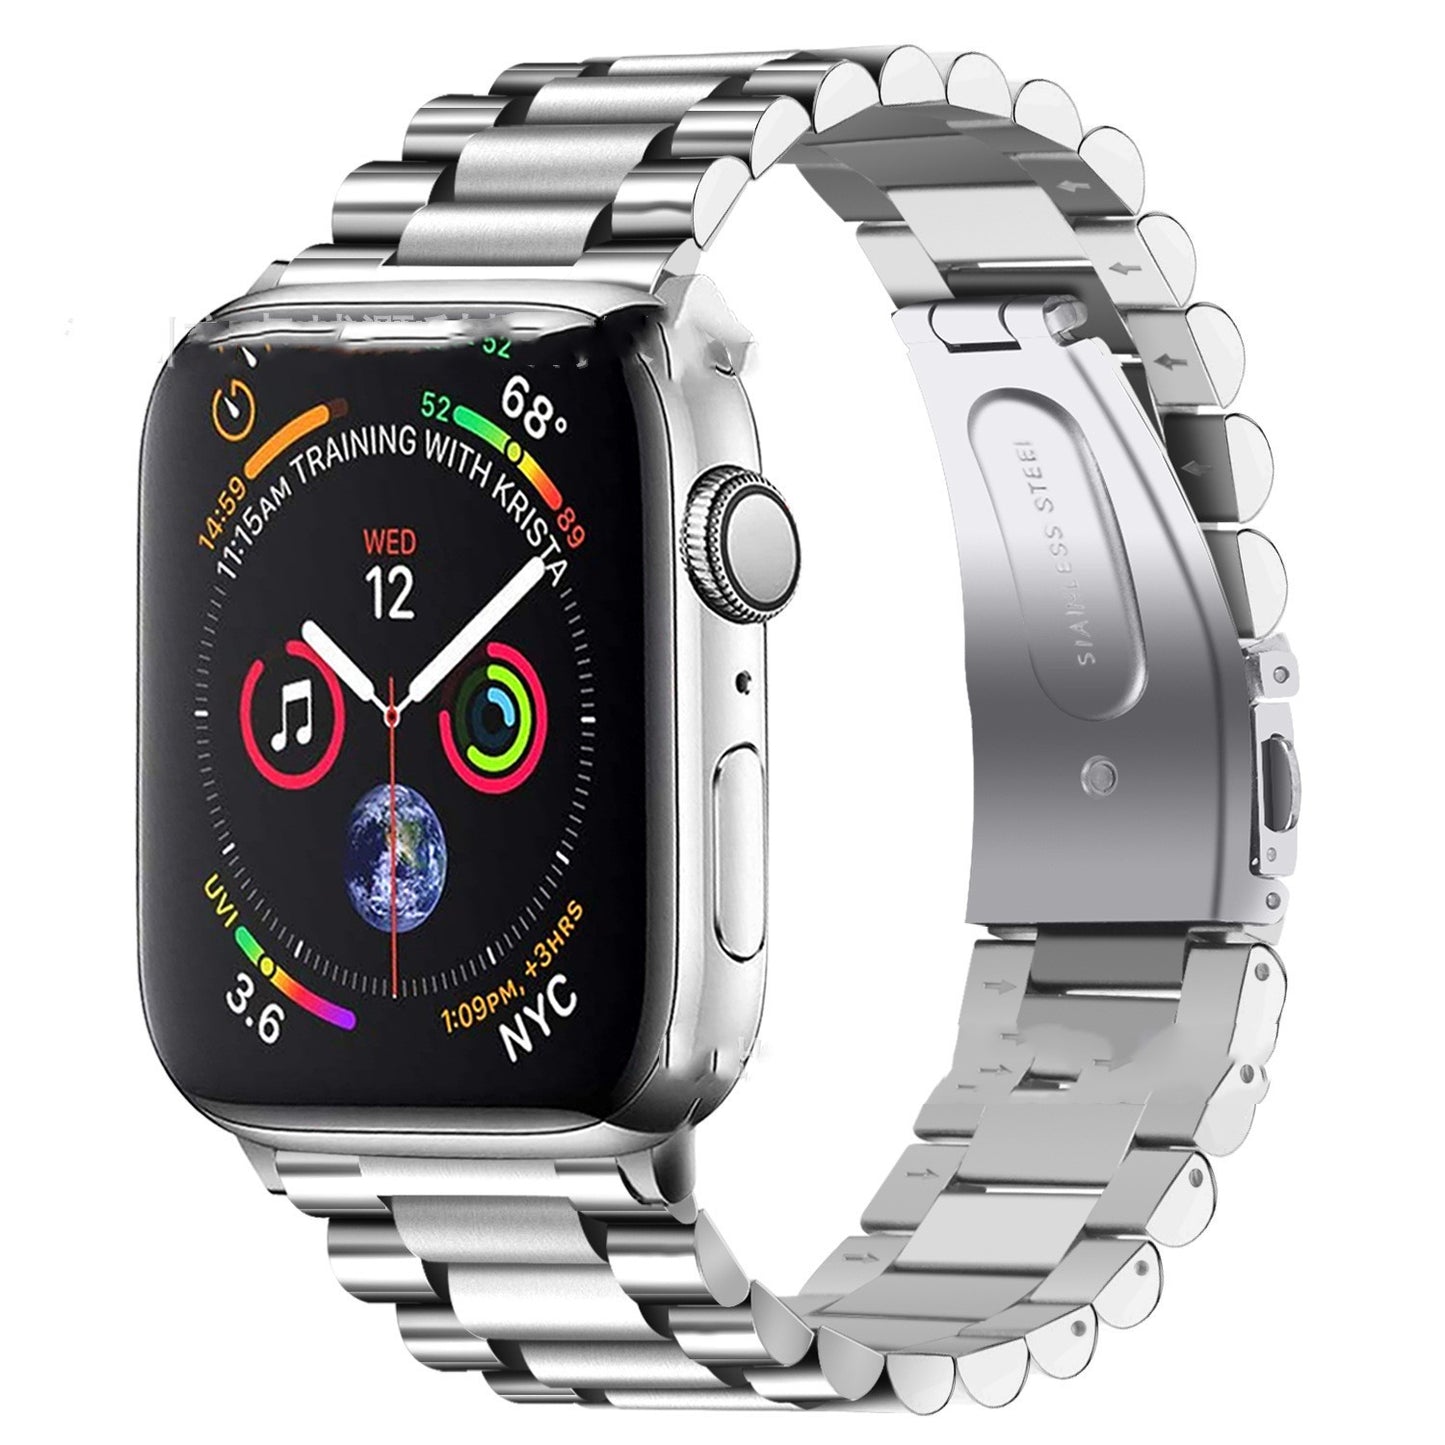 Stainless steel watch band for IOS